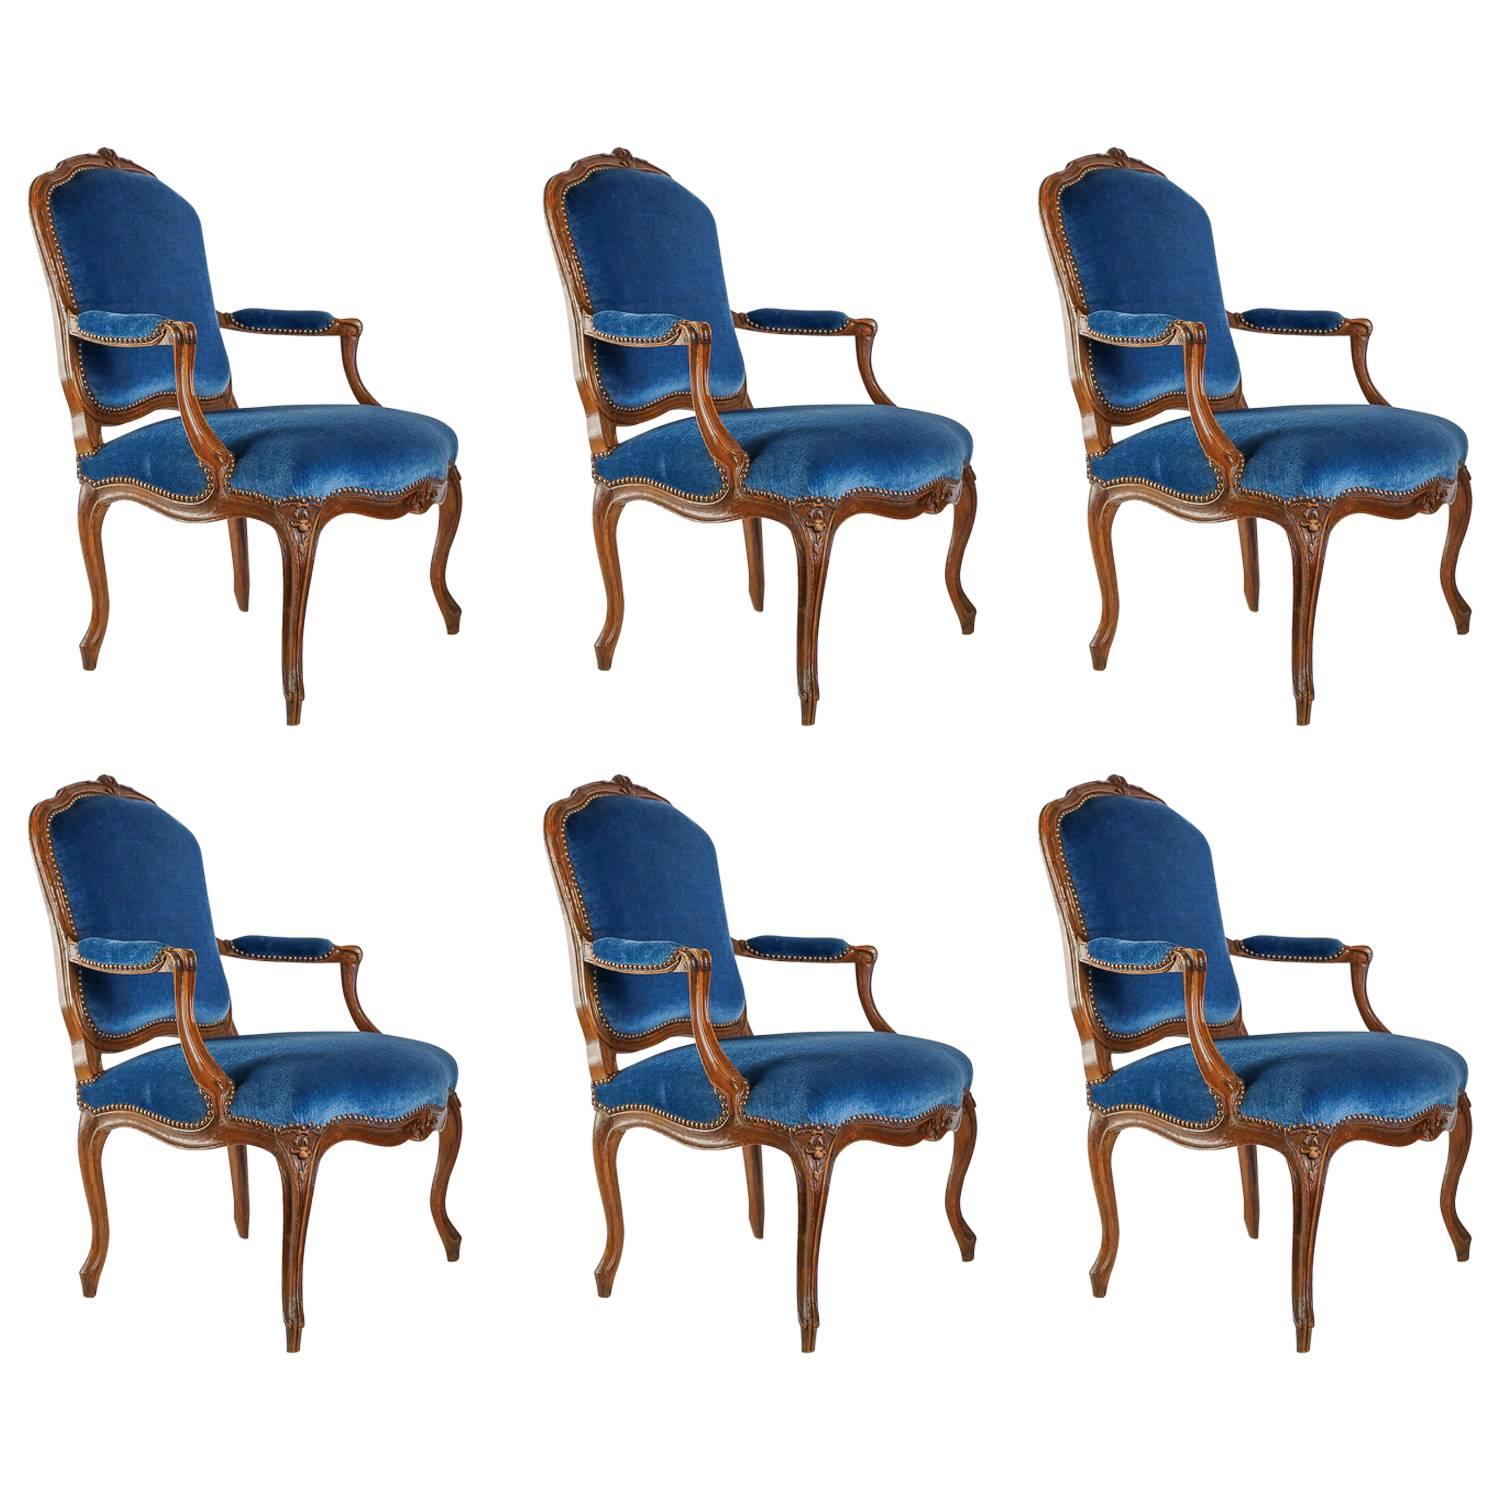 Stamped by Louis Delanois, Set of Six Louis XV Period Large Armchairs circa 1765